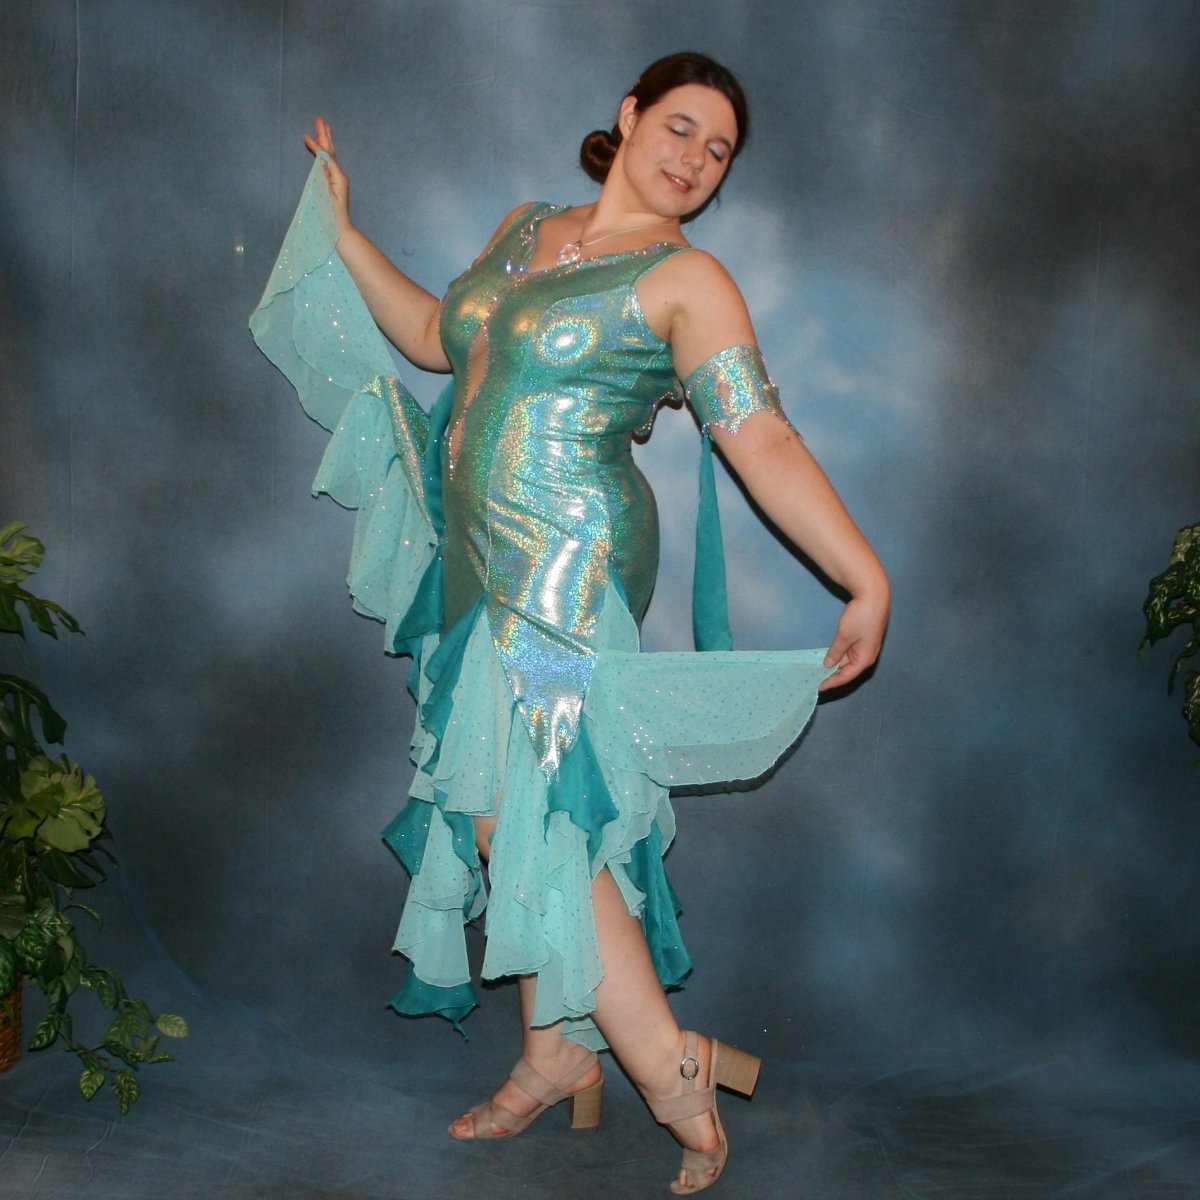 Crystal's Creations side view of Aqua Latin/rhythm dress created of gorgeous hologram base with flounces of aqua champagne sequin chiffon & teal glitter chiffon, embellished with CAB Swarovski stone work, with strap detailing on back. I envision this magical dress a gorgeous rumba, bolero or even a great solo dress for a waltz or foxtrot….or for an all around division.